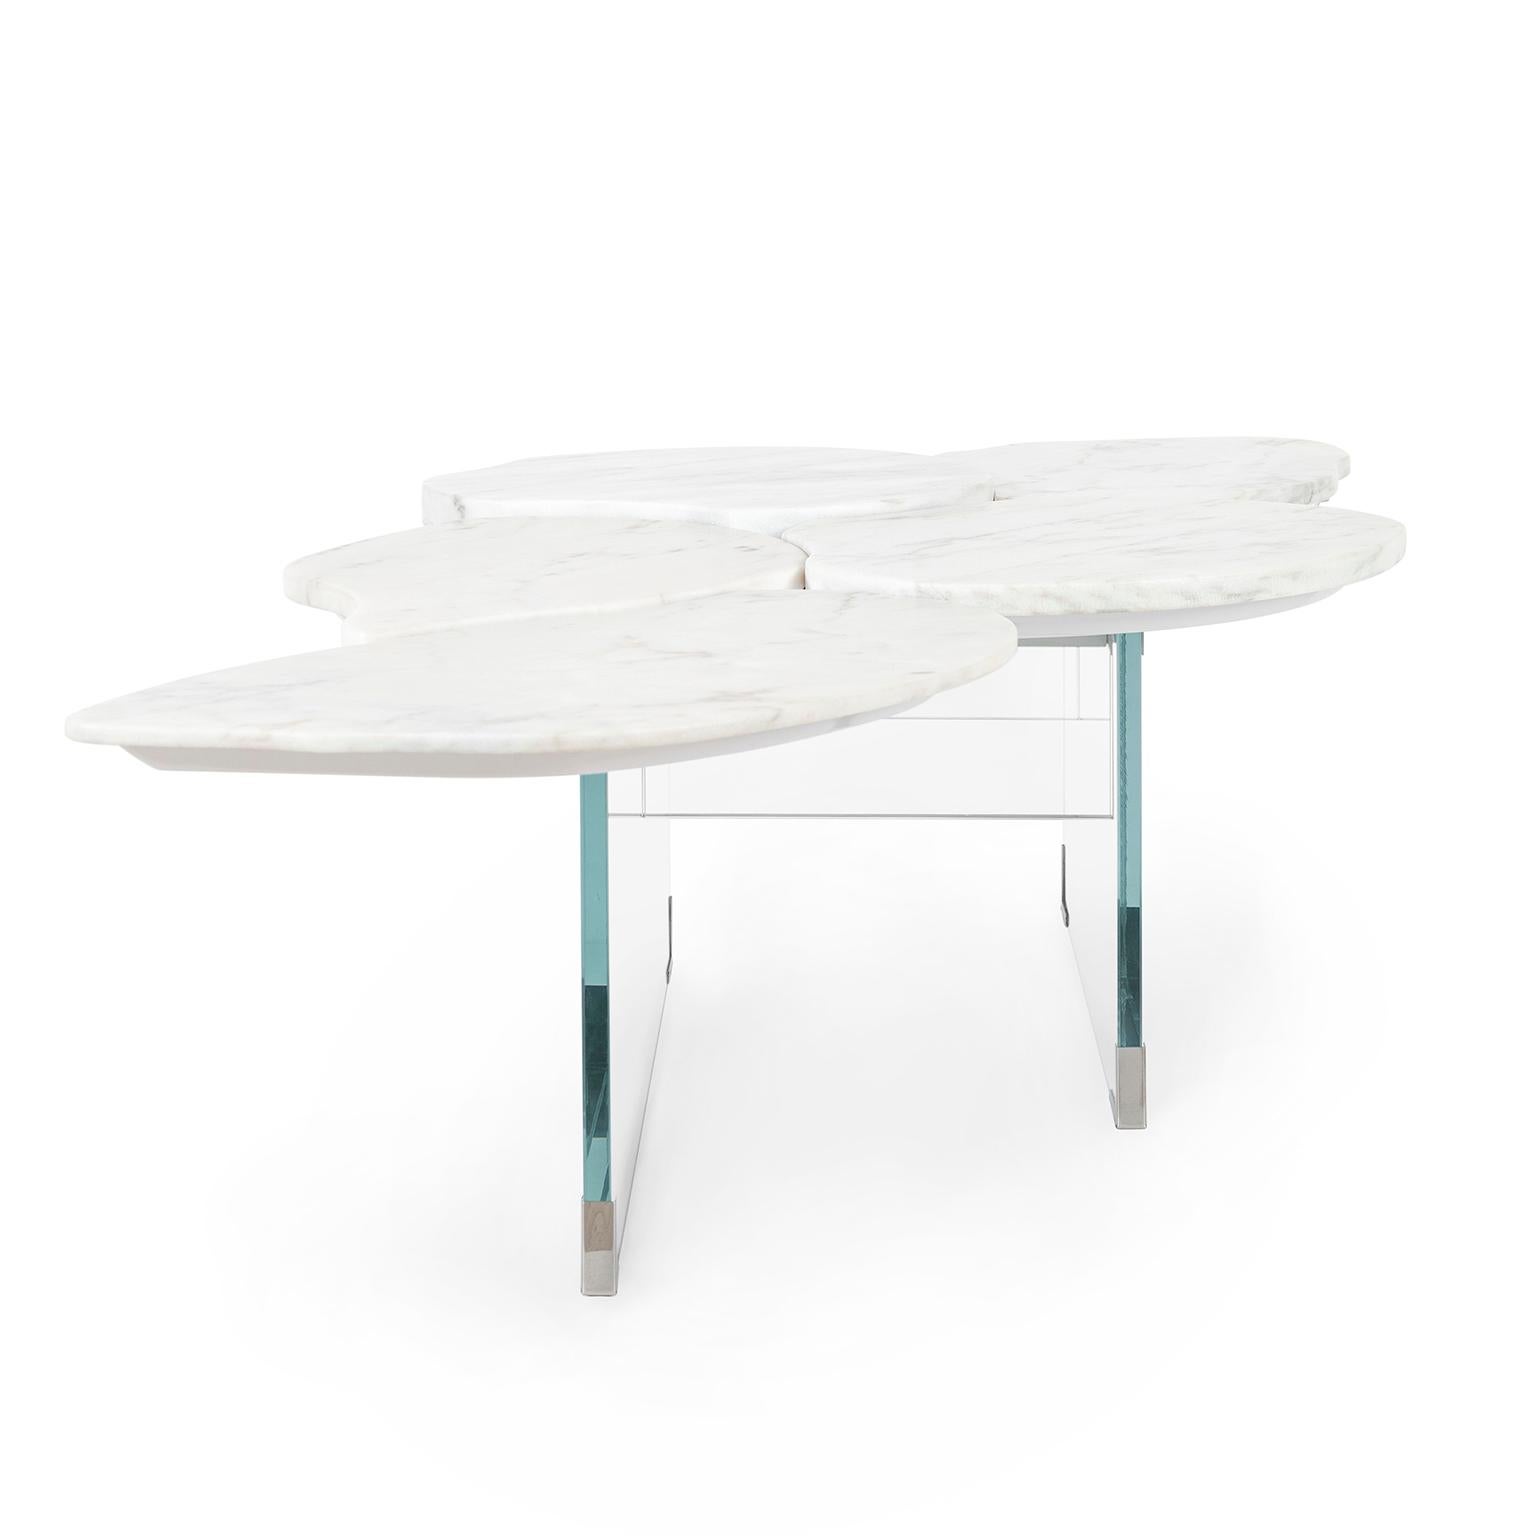 Infinity Coffee Table, Modern Collection, Handcrafted in Portugal - Europe by GF Modern.

The elegant movement of the Infinity coffee table reveals a flowing piece that reflects the passage of time in an infinite gaze.

The petal-shaped top in